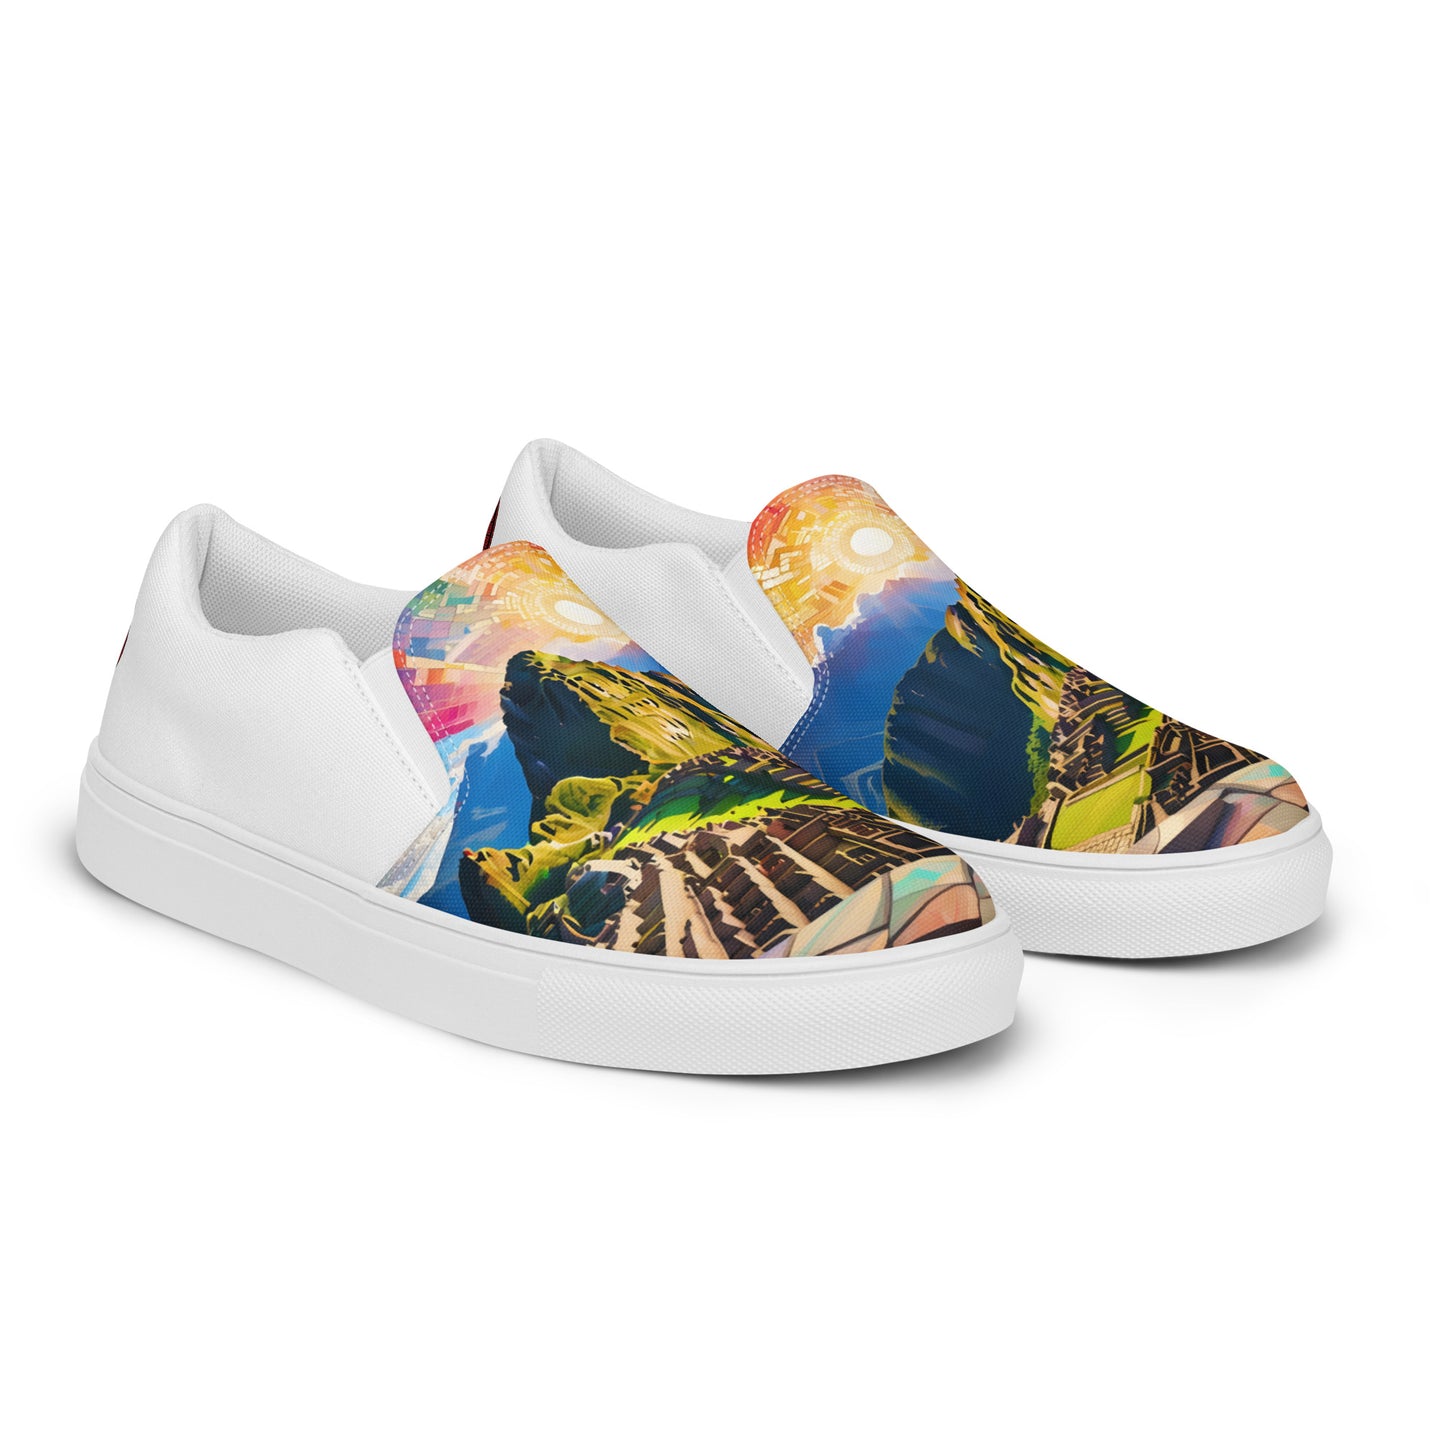 Machu Picchu - Stained glass - Men - White Slip-on shoes